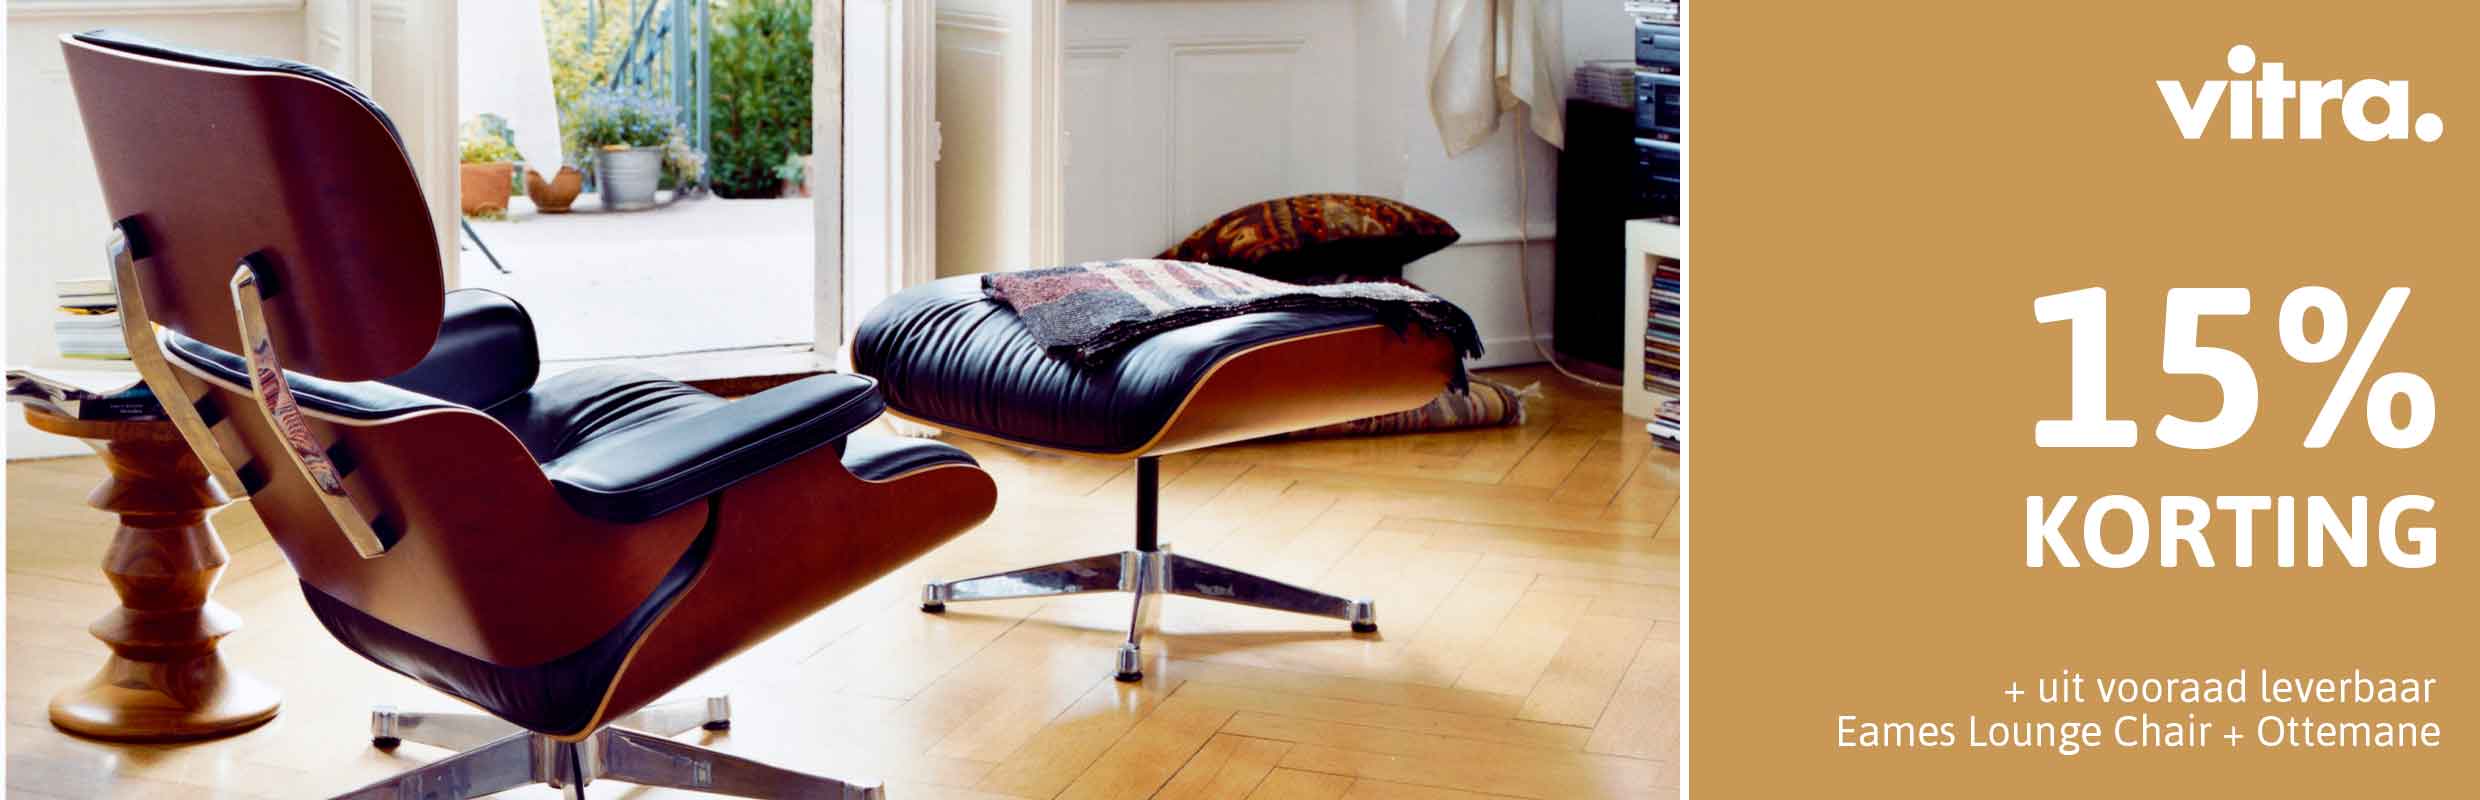 Actie Vitra Eames Lounge Chair